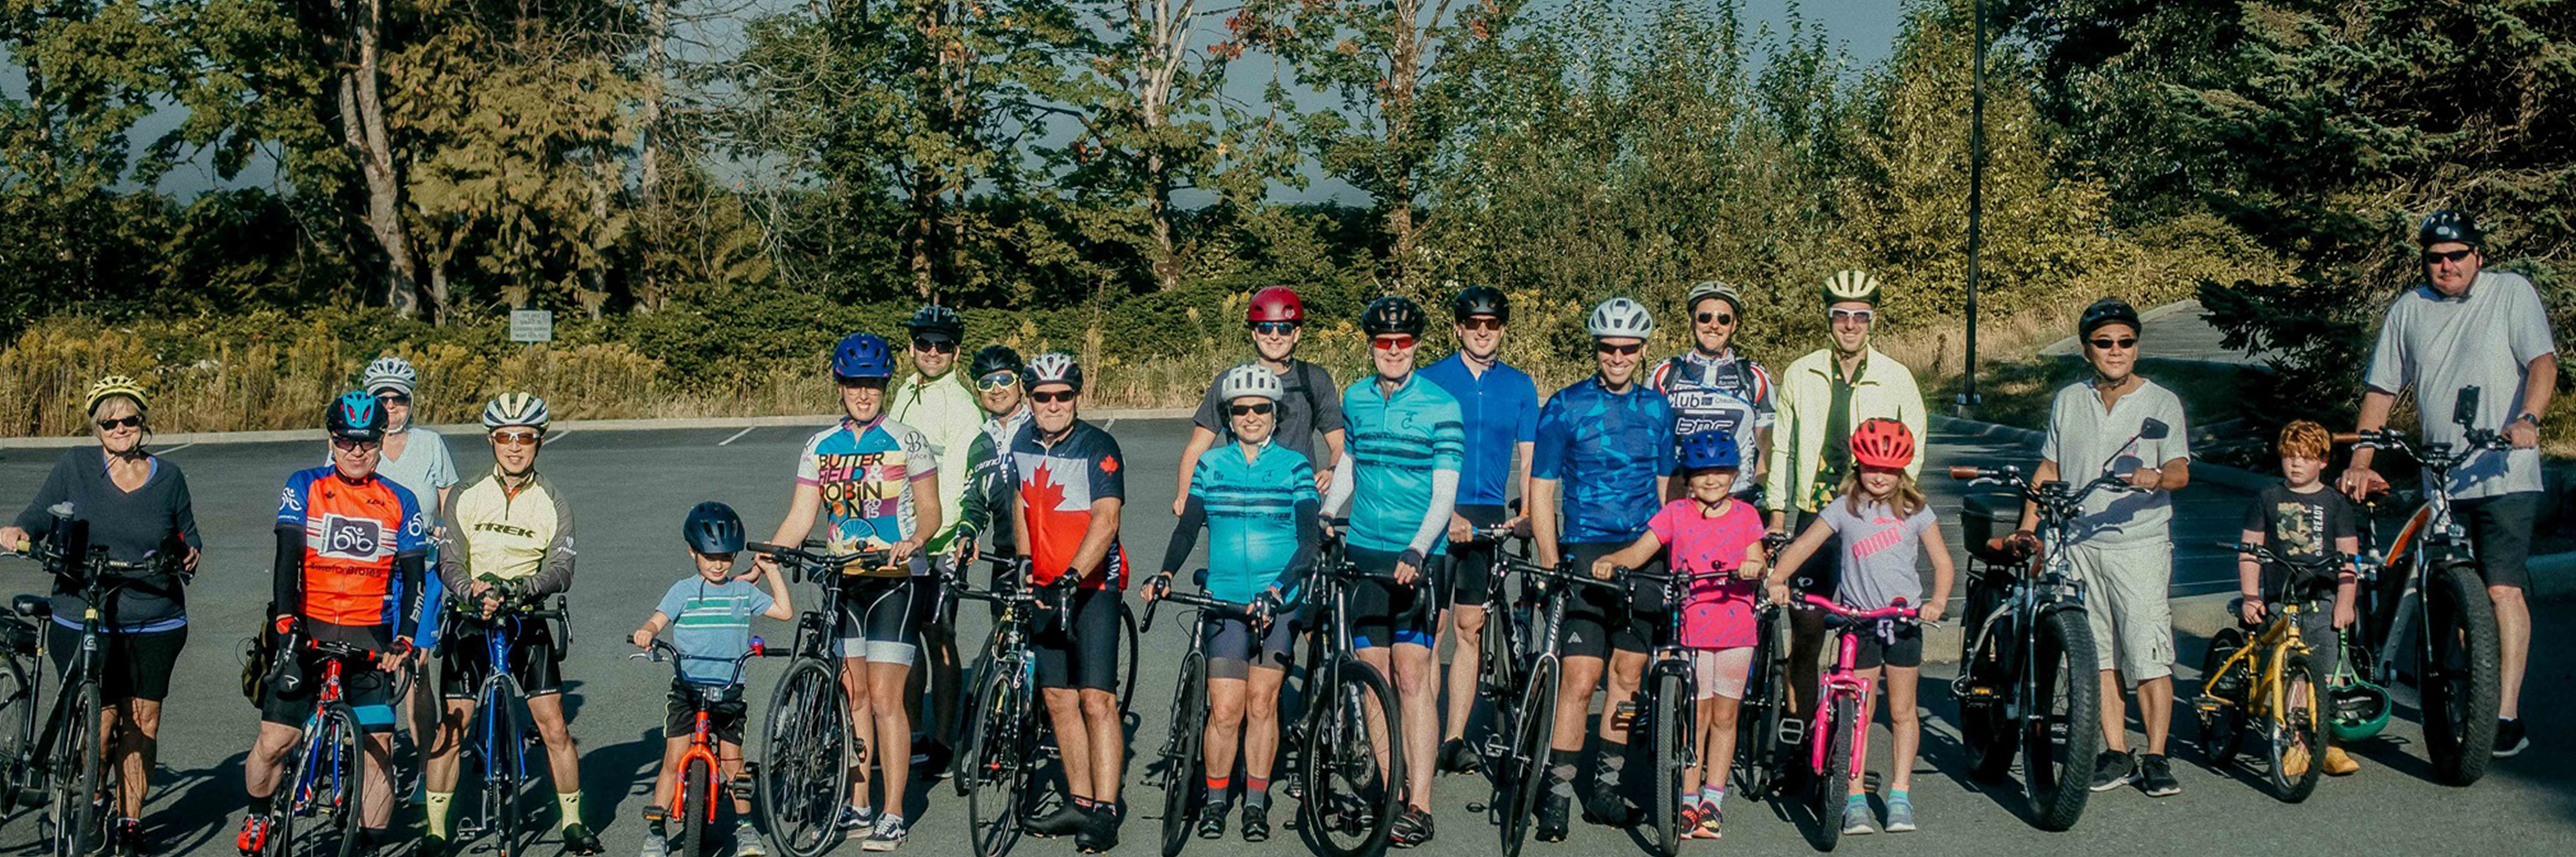 Photo banner for the 2022 Ride to Thrive with a photo of a group of riders from the 2021 event in Abbotsford, BC